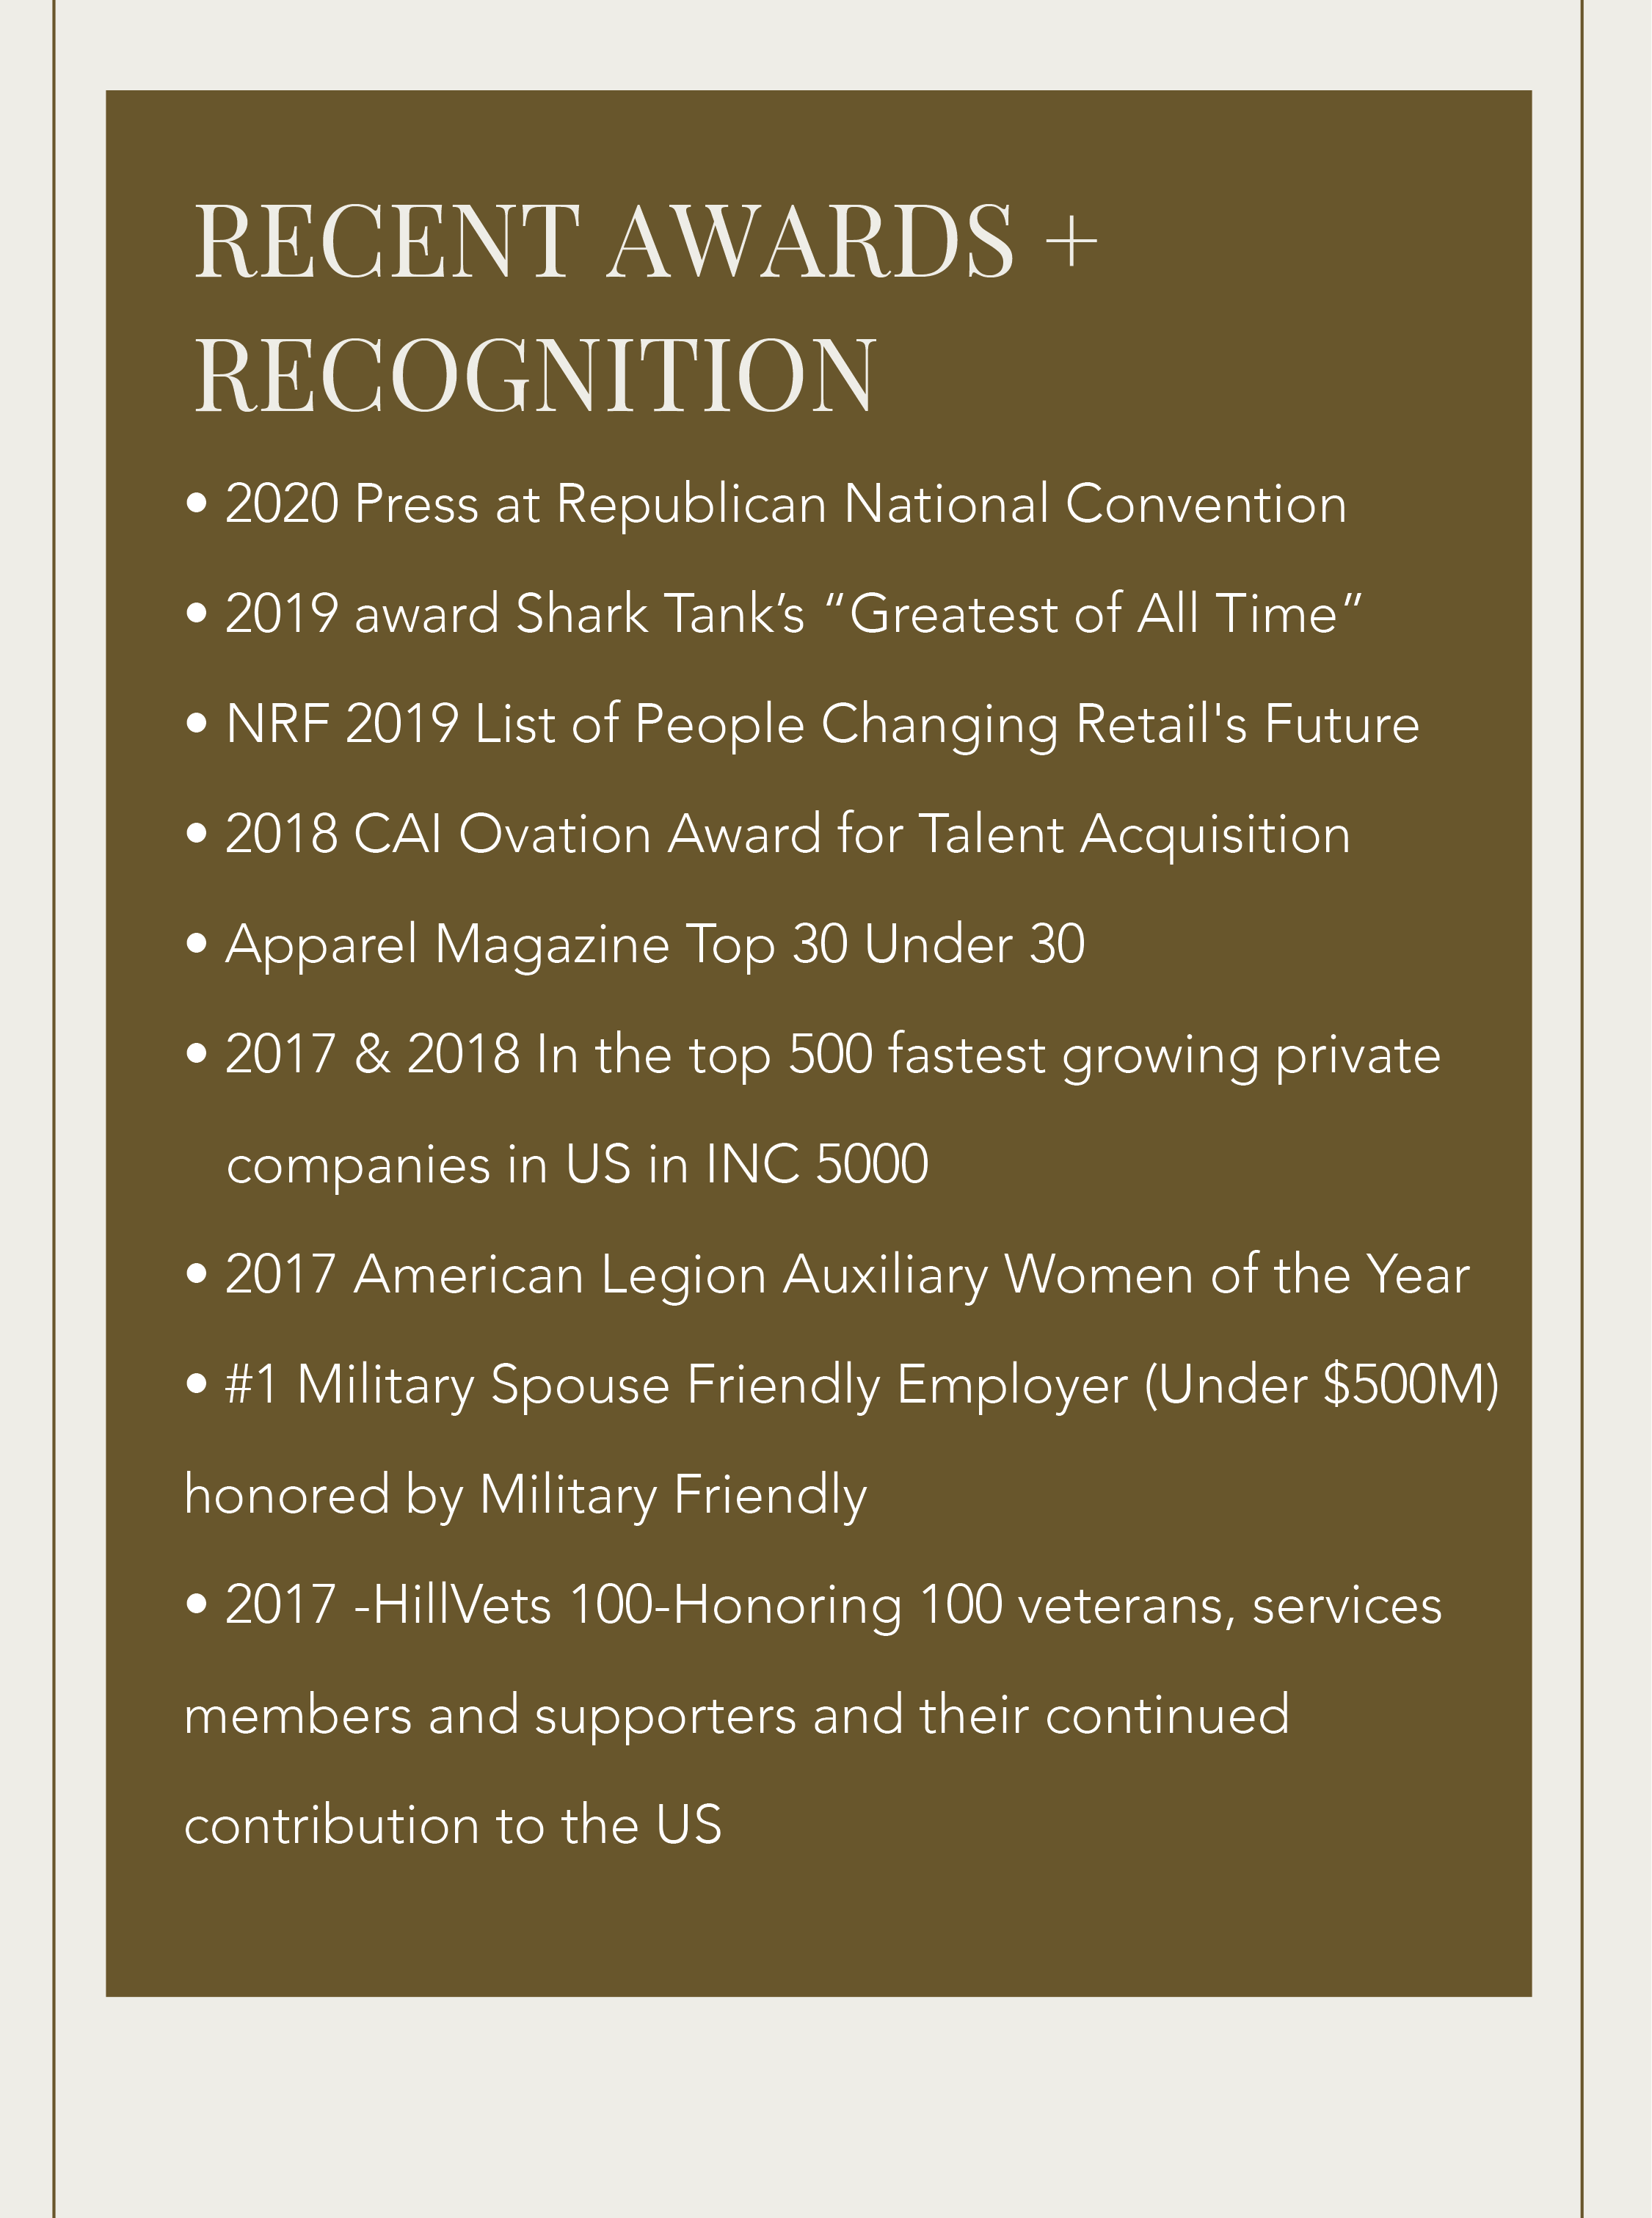 • 2020 Press at Republican National Convention • 2019 award Shark Tank’s “Greatest of All Time” • NRF 2019 List of People Changing Retail's Future • 2018 CAI Ovation Award for Talent Acquisition • Apparel Magazine Top 30 Under 30 • 2017 & 2018 In the top 500 fastest growing private 	   companies in US in INC 5000 • 2017 American Legion Auxiliary Women of the Year • #1 Military Spouse Friendly Employer (Under $500M) honored by Military Friendly  • 2017 -HillVets 100-Honoring 100 veterans, services members and supporters and their continued  contribution to the US